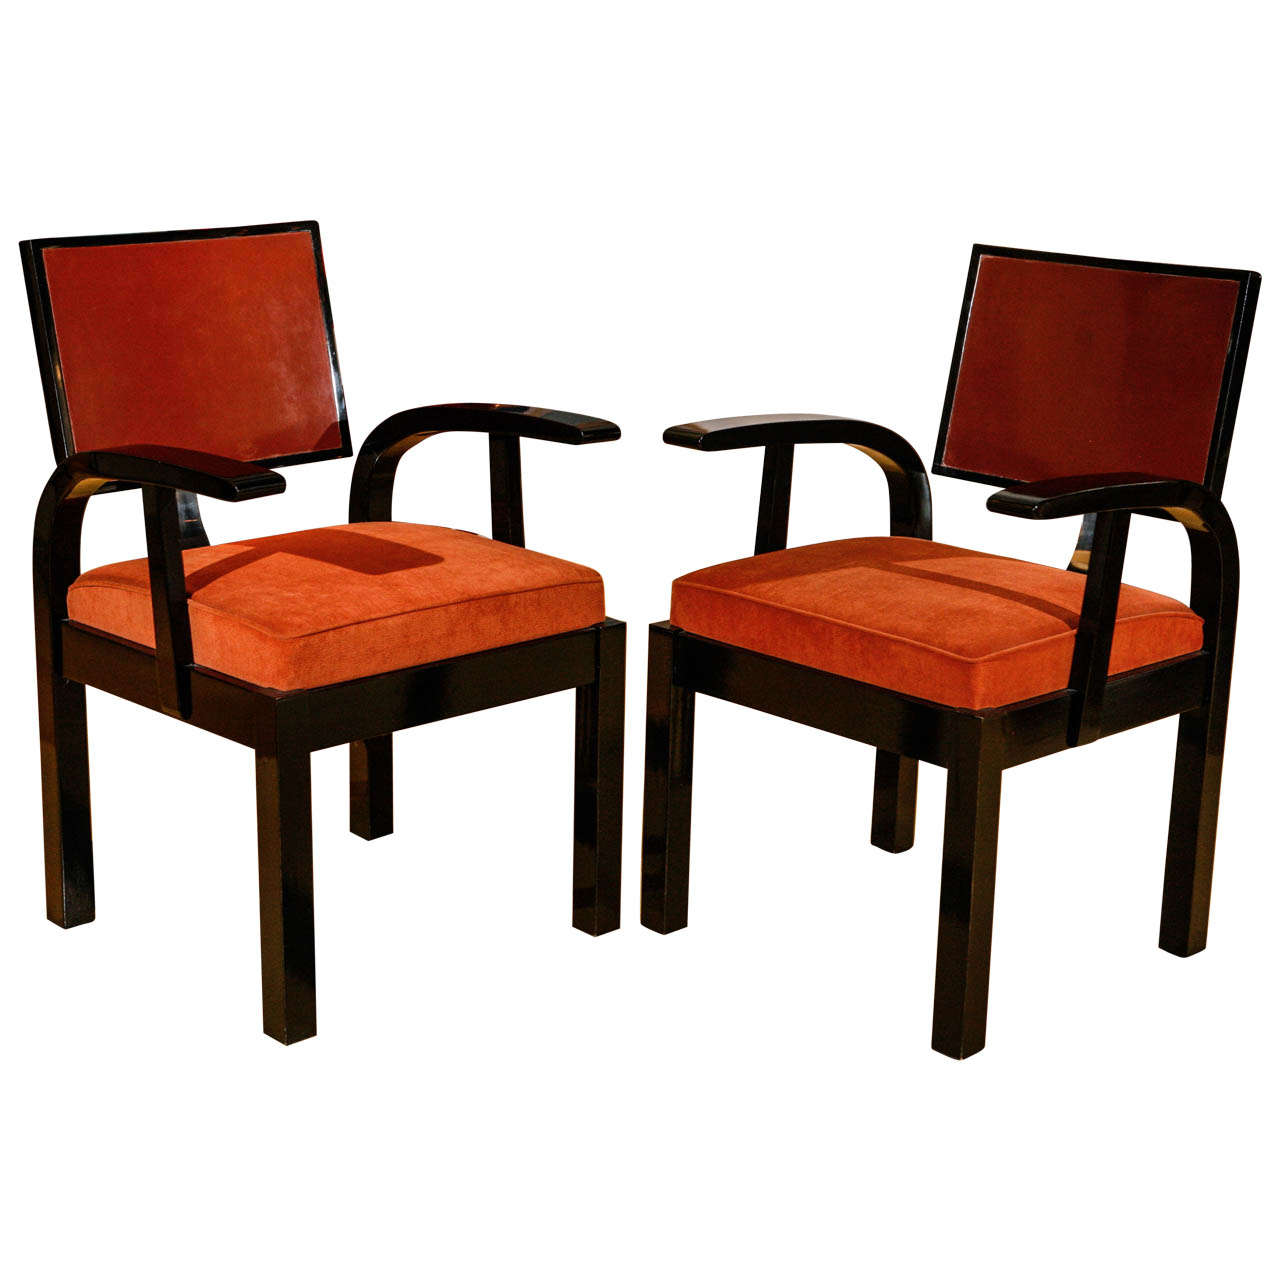 Pair of Black Lacquer Hungarian Modernist Chairs For Sale